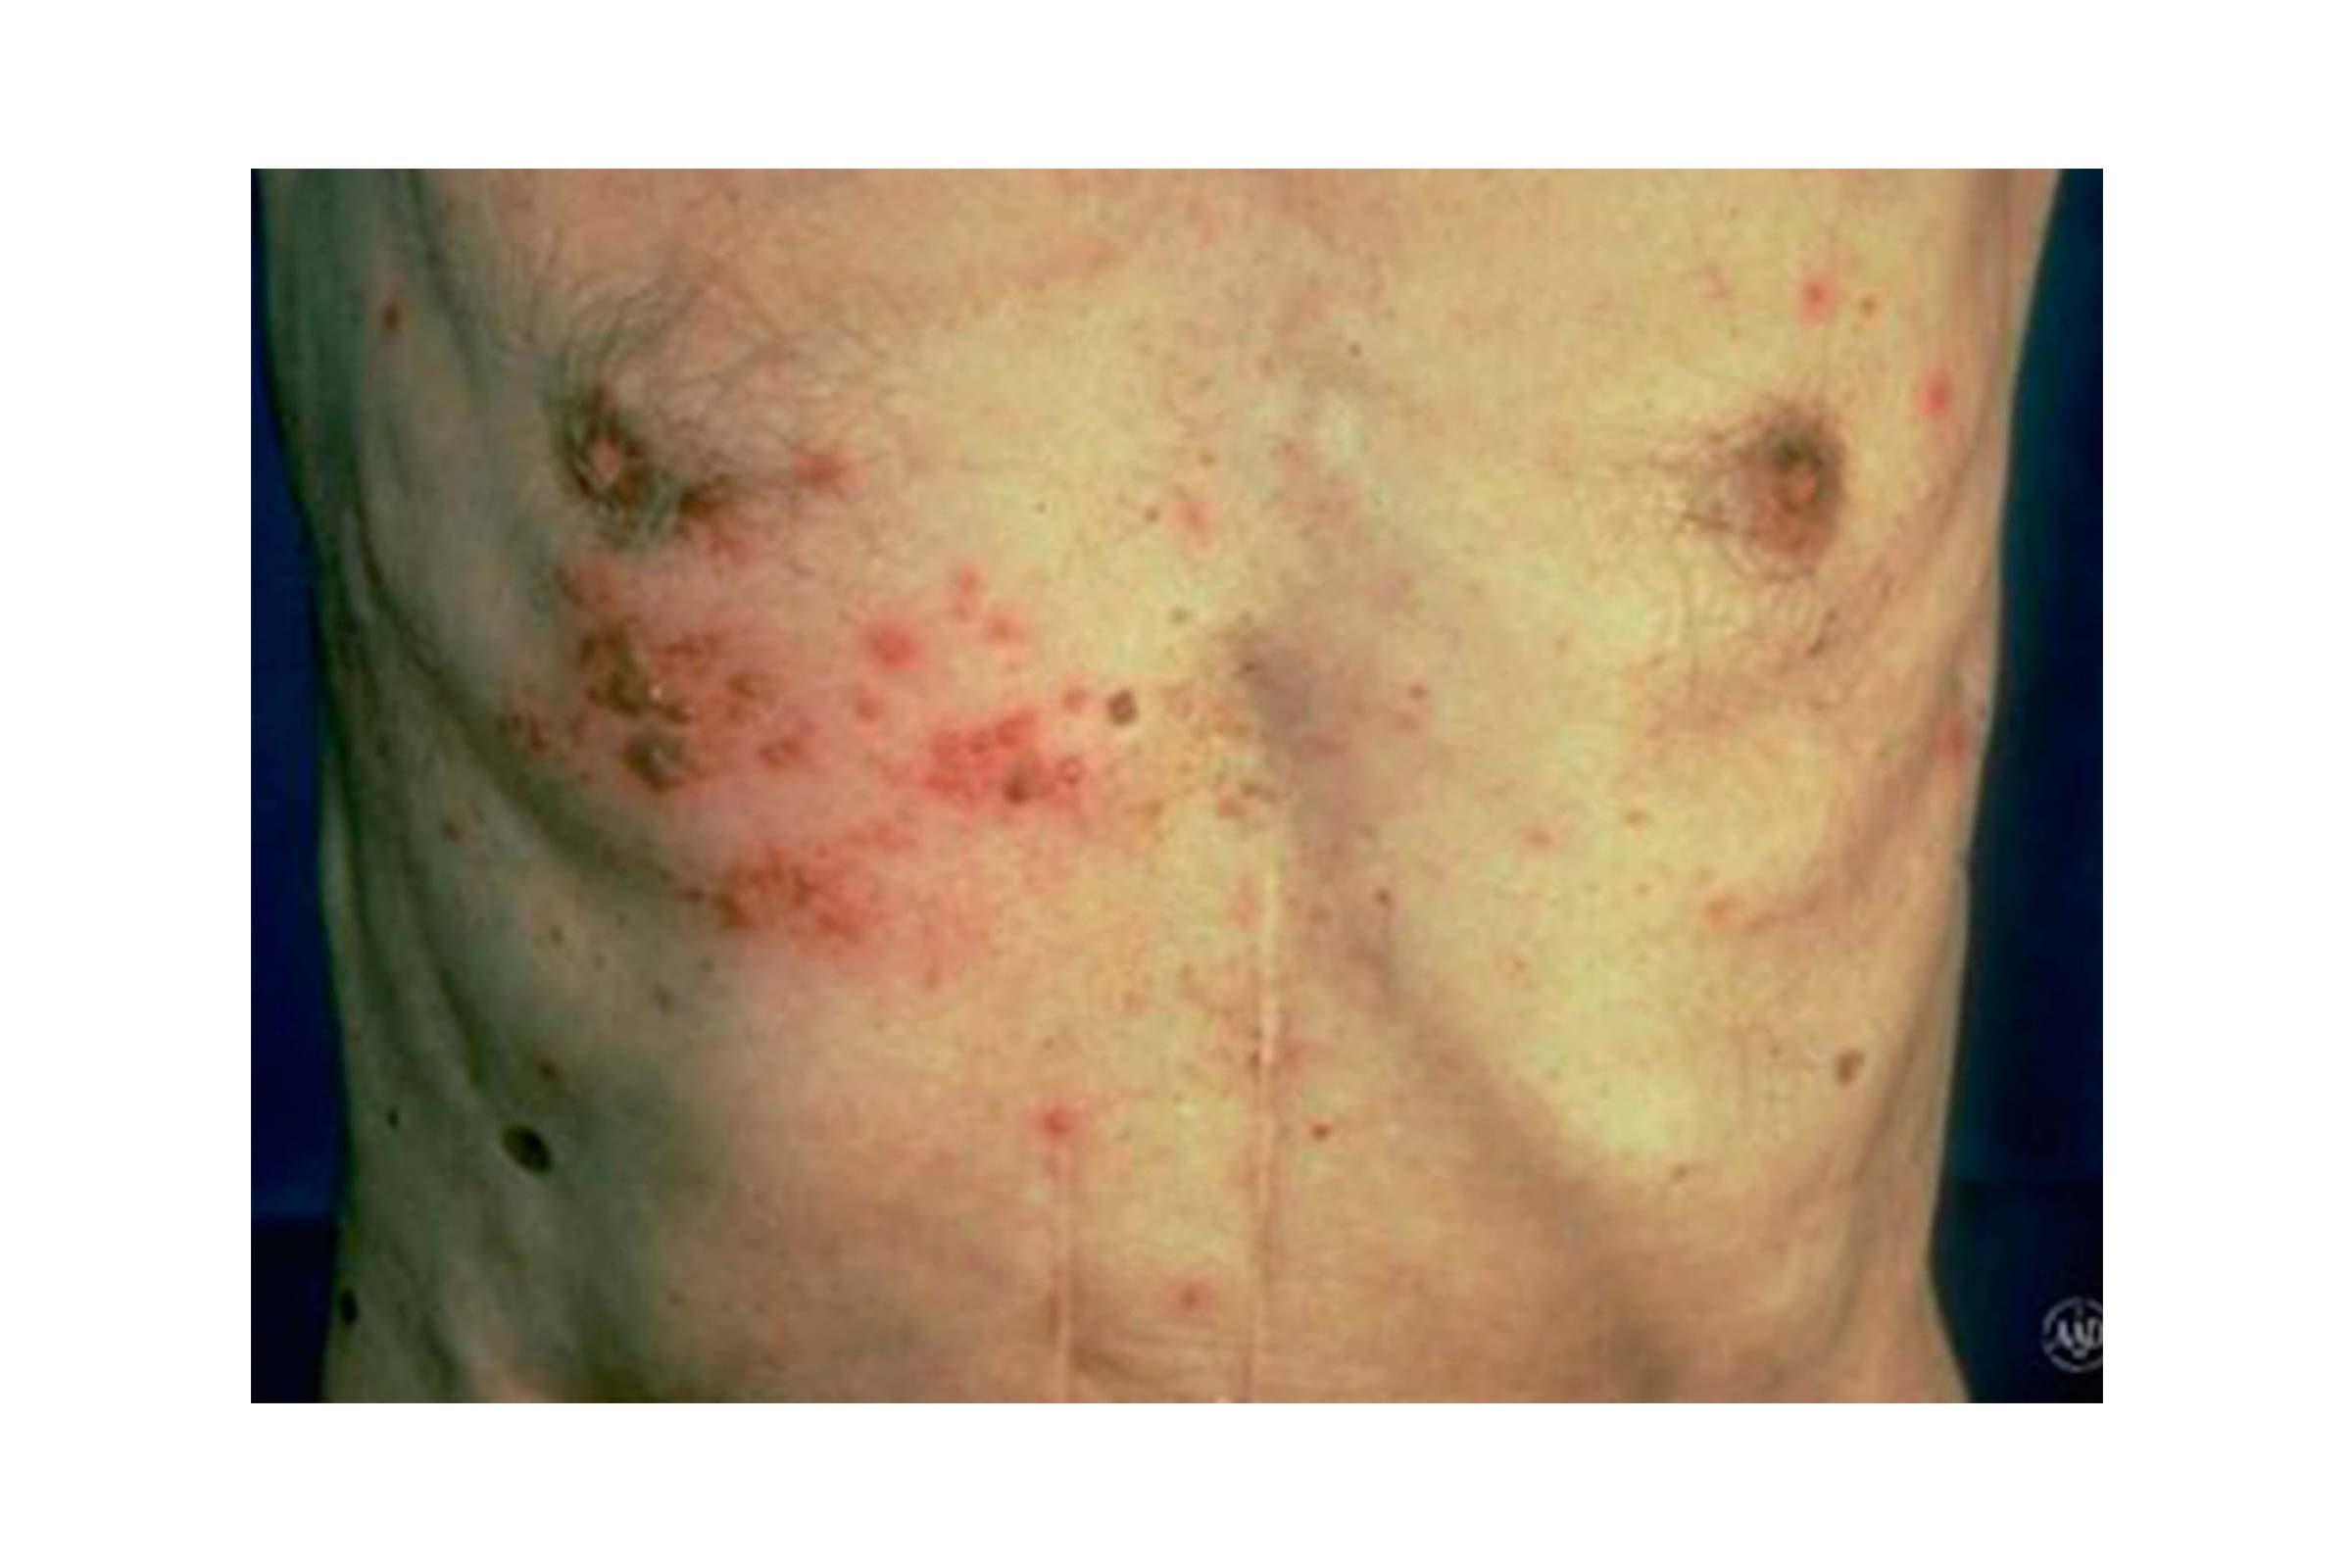 https://www.thehealthy.com/wp-content/uploads/2016/12/10-whats-that-rash-shingles.jpg?fit=700%2C467